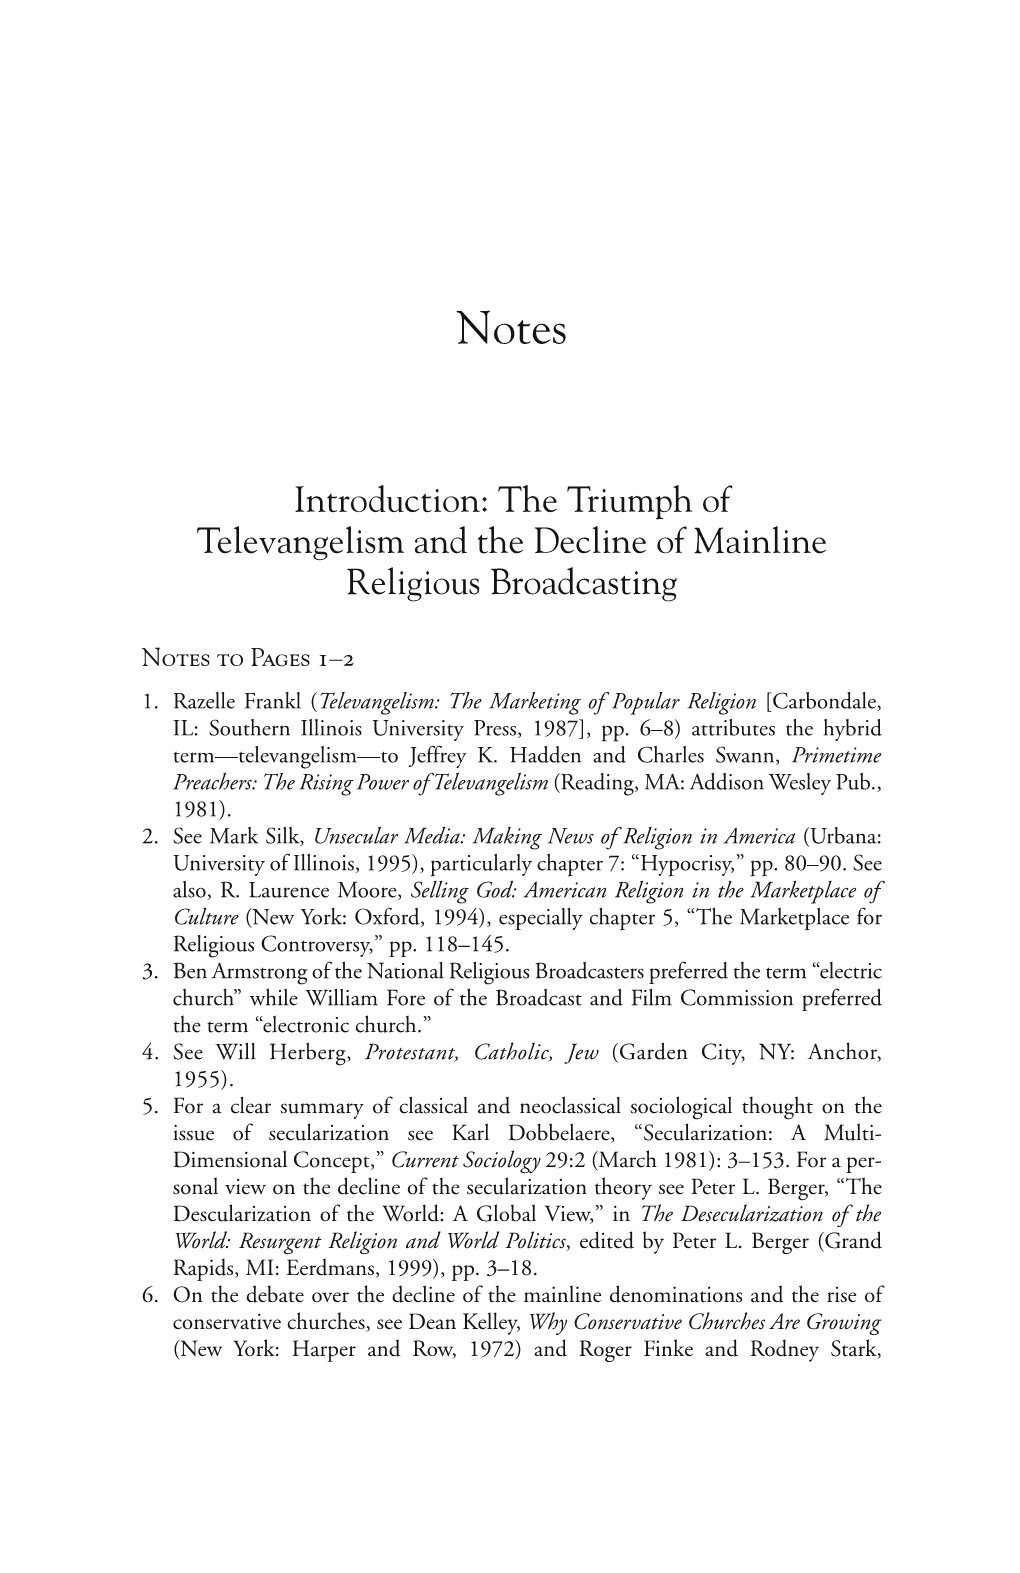 The Triumph of Televangelism and the Decline of Mainline Religious Broadcasting